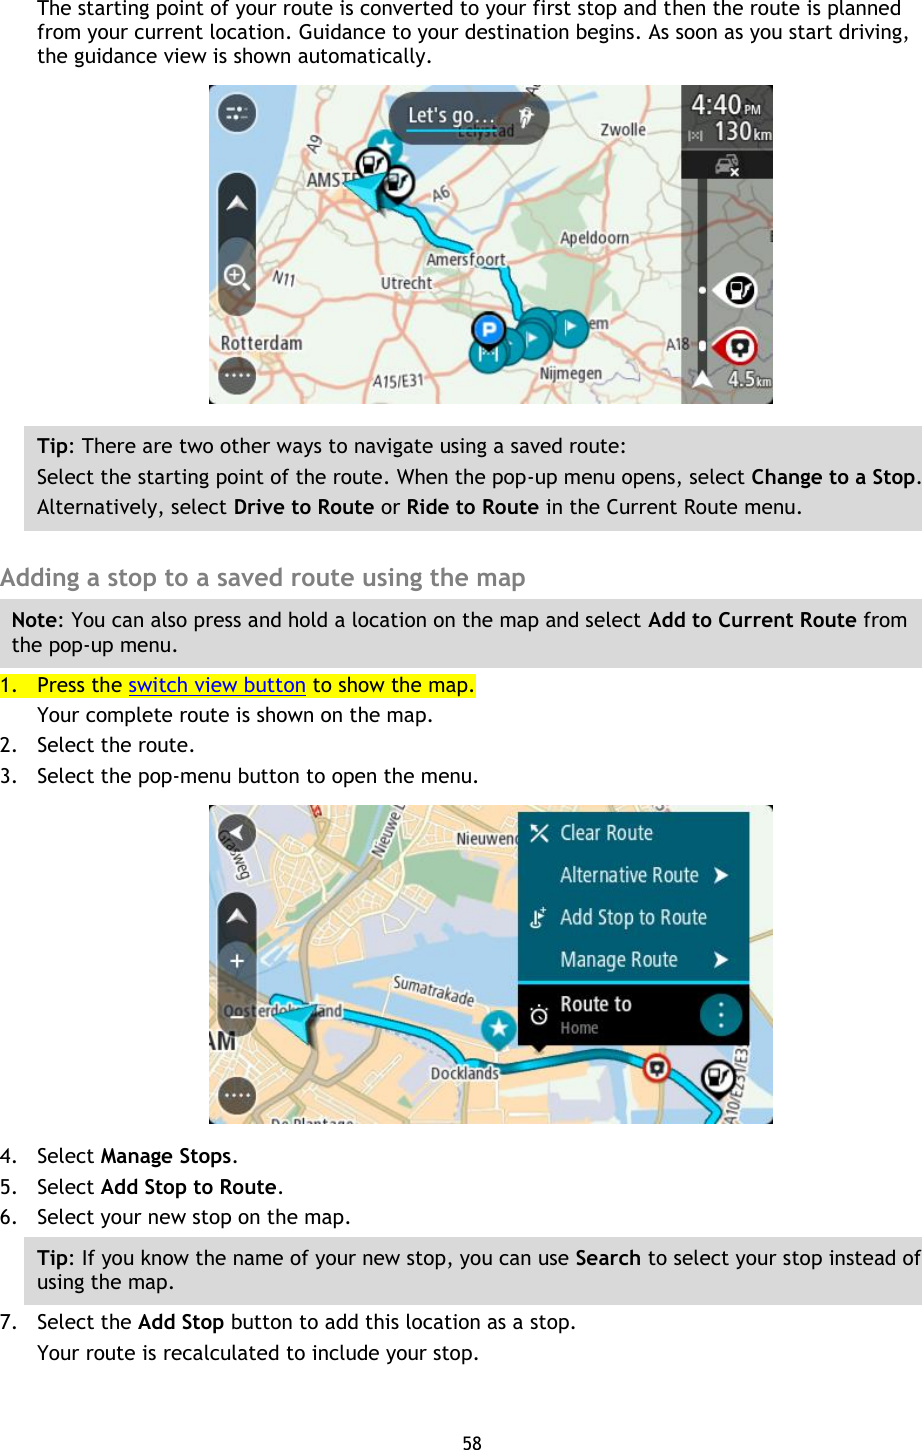 58    The starting point of your route is converted to your first stop and then the route is planned from your current location. Guidance to your destination begins. As soon as you start driving, the guidance view is shown automatically.  Tip: There are two other ways to navigate using a saved route: Select the starting point of the route. When the pop-up menu opens, select Change to a Stop. Alternatively, select Drive to Route or Ride to Route in the Current Route menu.  Adding a stop to a saved route using the map Note: You can also press and hold a location on the map and select Add to Current Route from the pop-up menu. 1. Press the switch view button to show the map. Your complete route is shown on the map. 2. Select the route. 3. Select the pop-menu button to open the menu.  4. Select Manage Stops. 5. Select Add Stop to Route. 6. Select your new stop on the map. Tip: If you know the name of your new stop, you can use Search to select your stop instead of using the map. 7. Select the Add Stop button to add this location as a stop. Your route is recalculated to include your stop. 